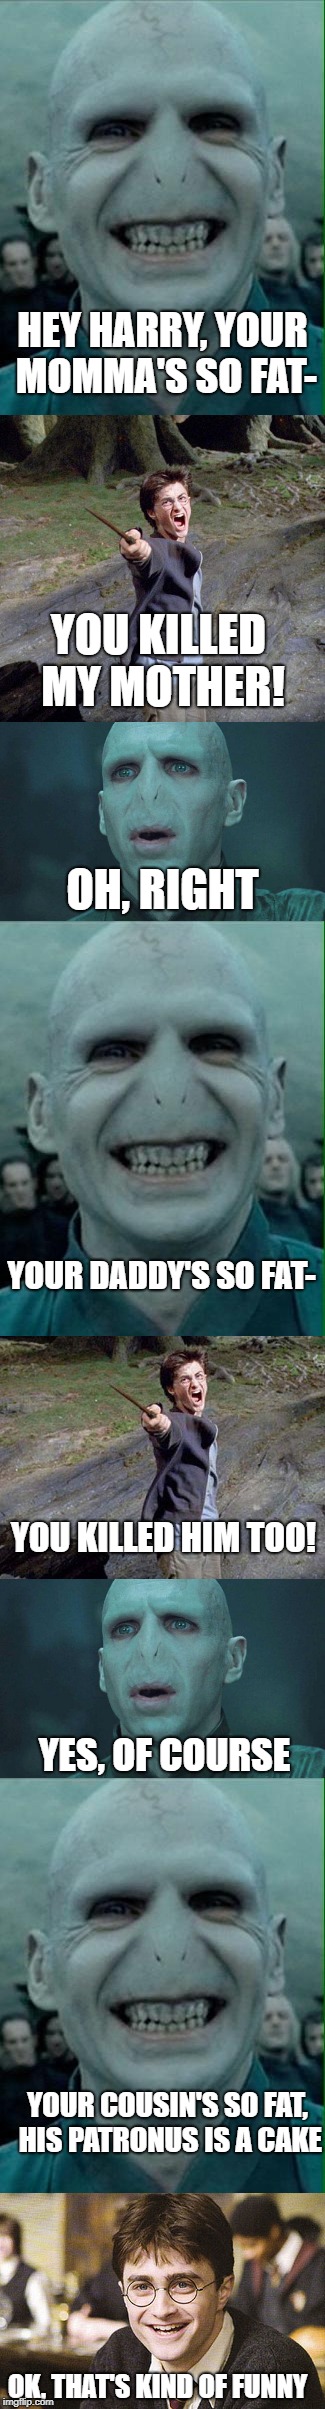 Can't argue with that one. | HEY HARRY, YOUR MOMMA'S SO FAT-; YOU KILLED MY MOTHER! OH, RIGHT; YOUR DADDY'S SO FAT-; YOU KILLED HIM TOO! YES, OF COURSE; YOUR COUSIN'S SO FAT, HIS PATRONUS IS A CAKE; OK, THAT'S KIND OF FUNNY | image tagged in memes,funny,harry potter,lord voldemort,yo momma so fat | made w/ Imgflip meme maker